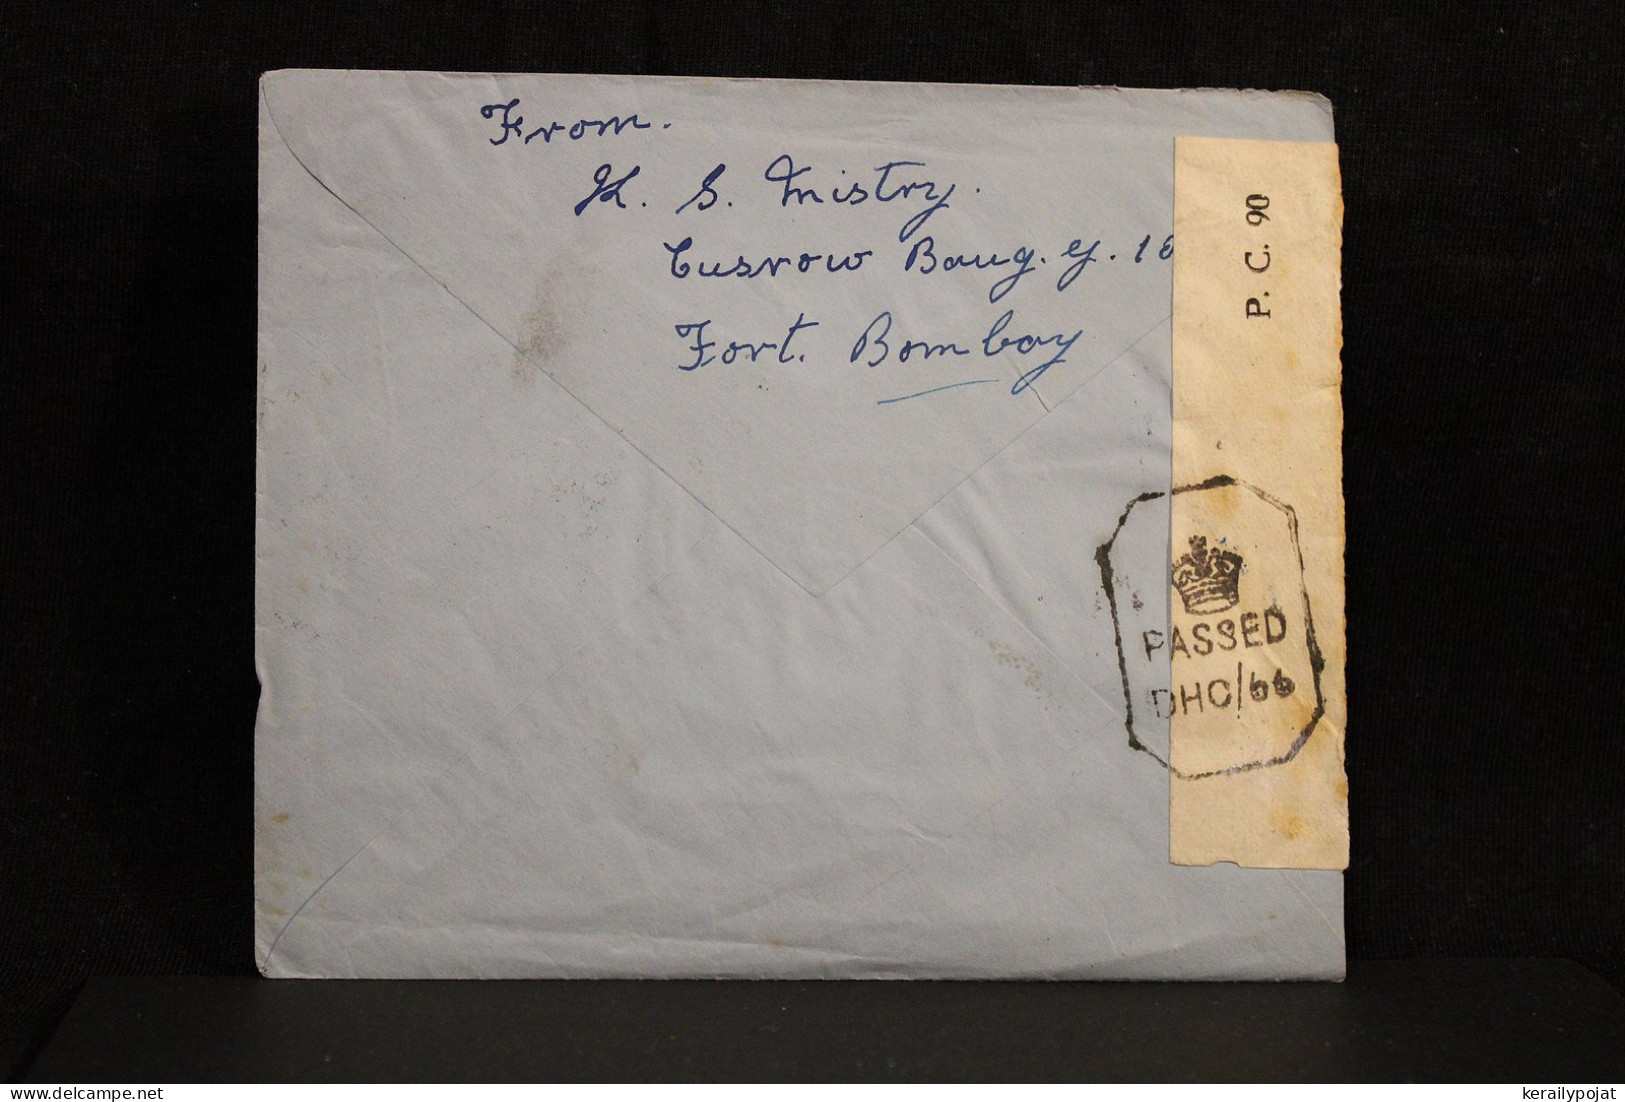 India 1930's Censored Air Mail Cover To UK__(4341) - Luftpost